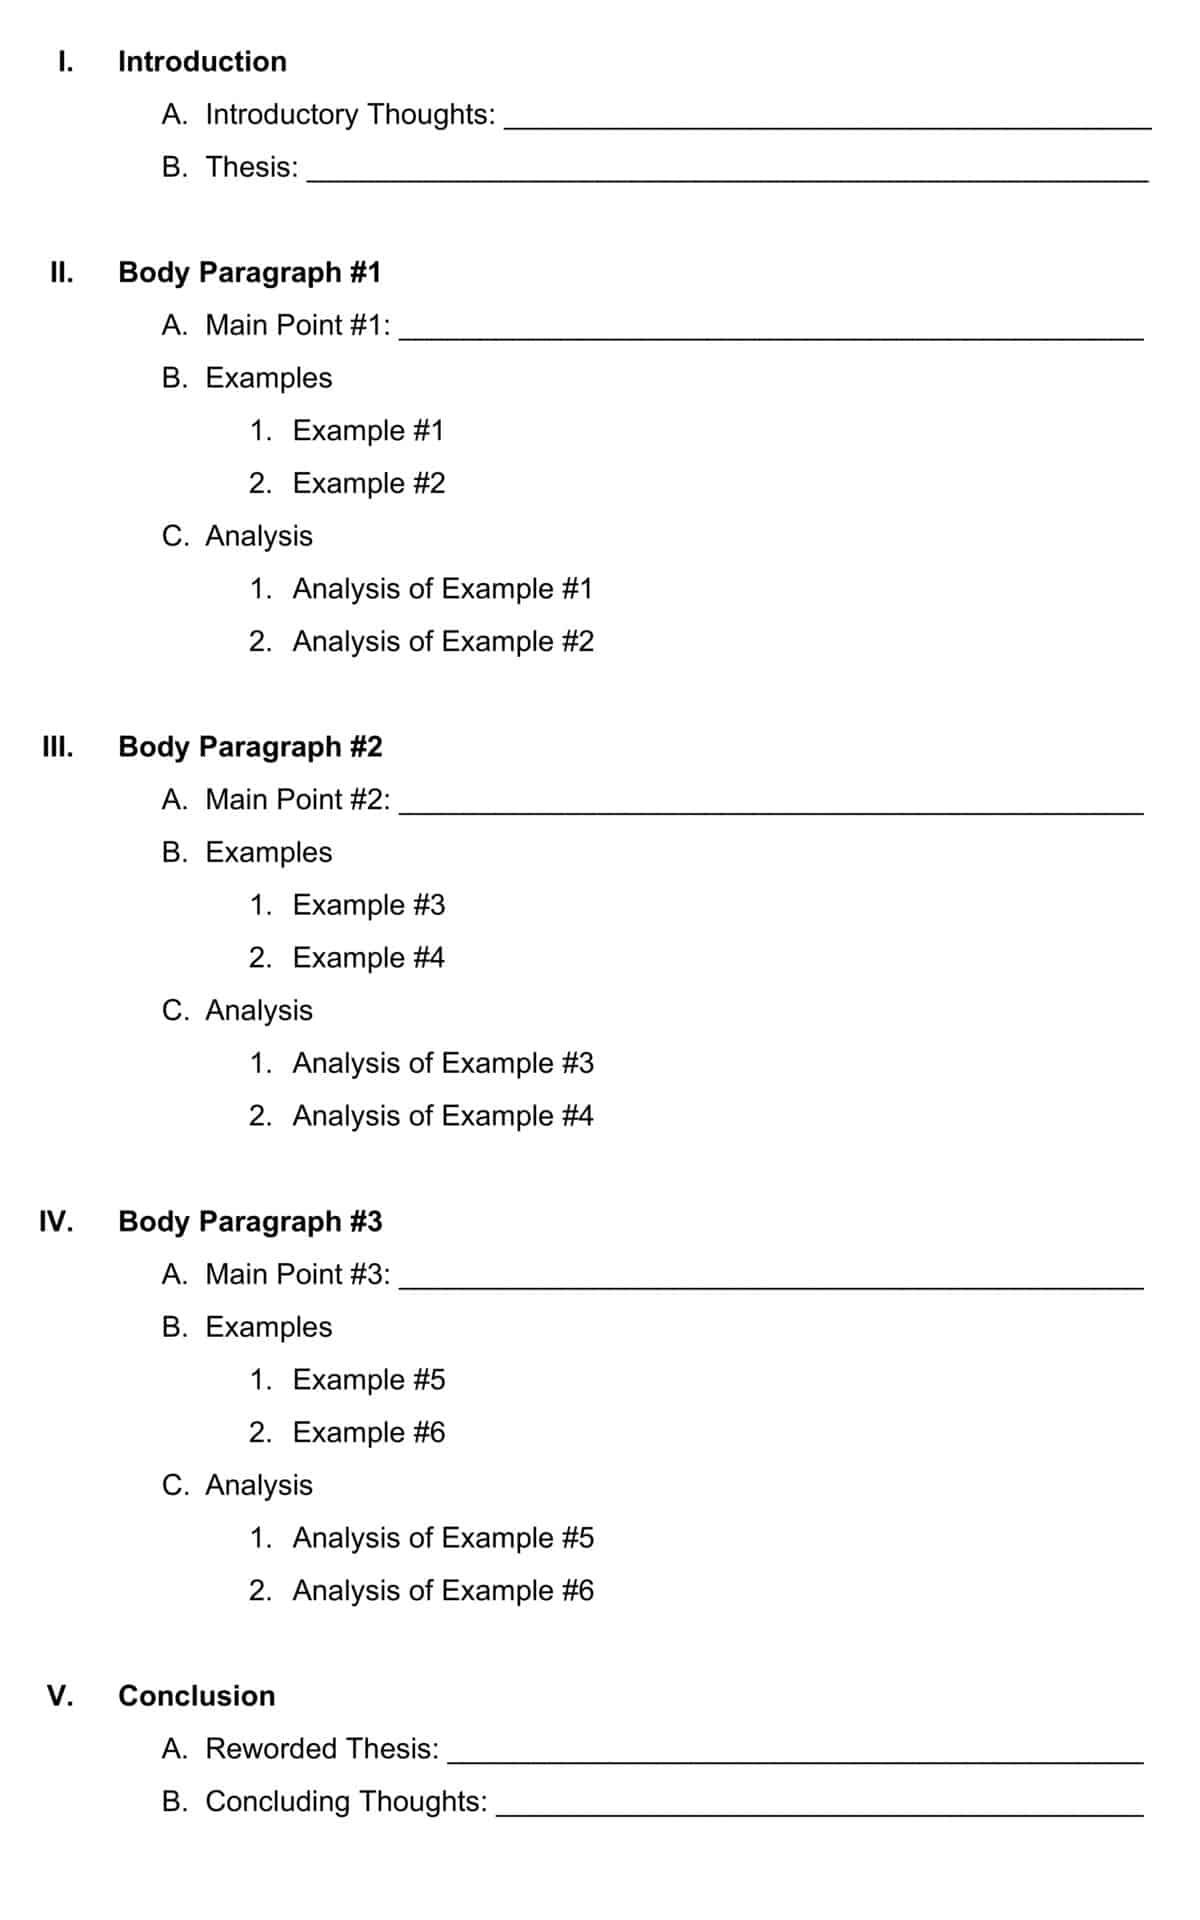 Paper outline example